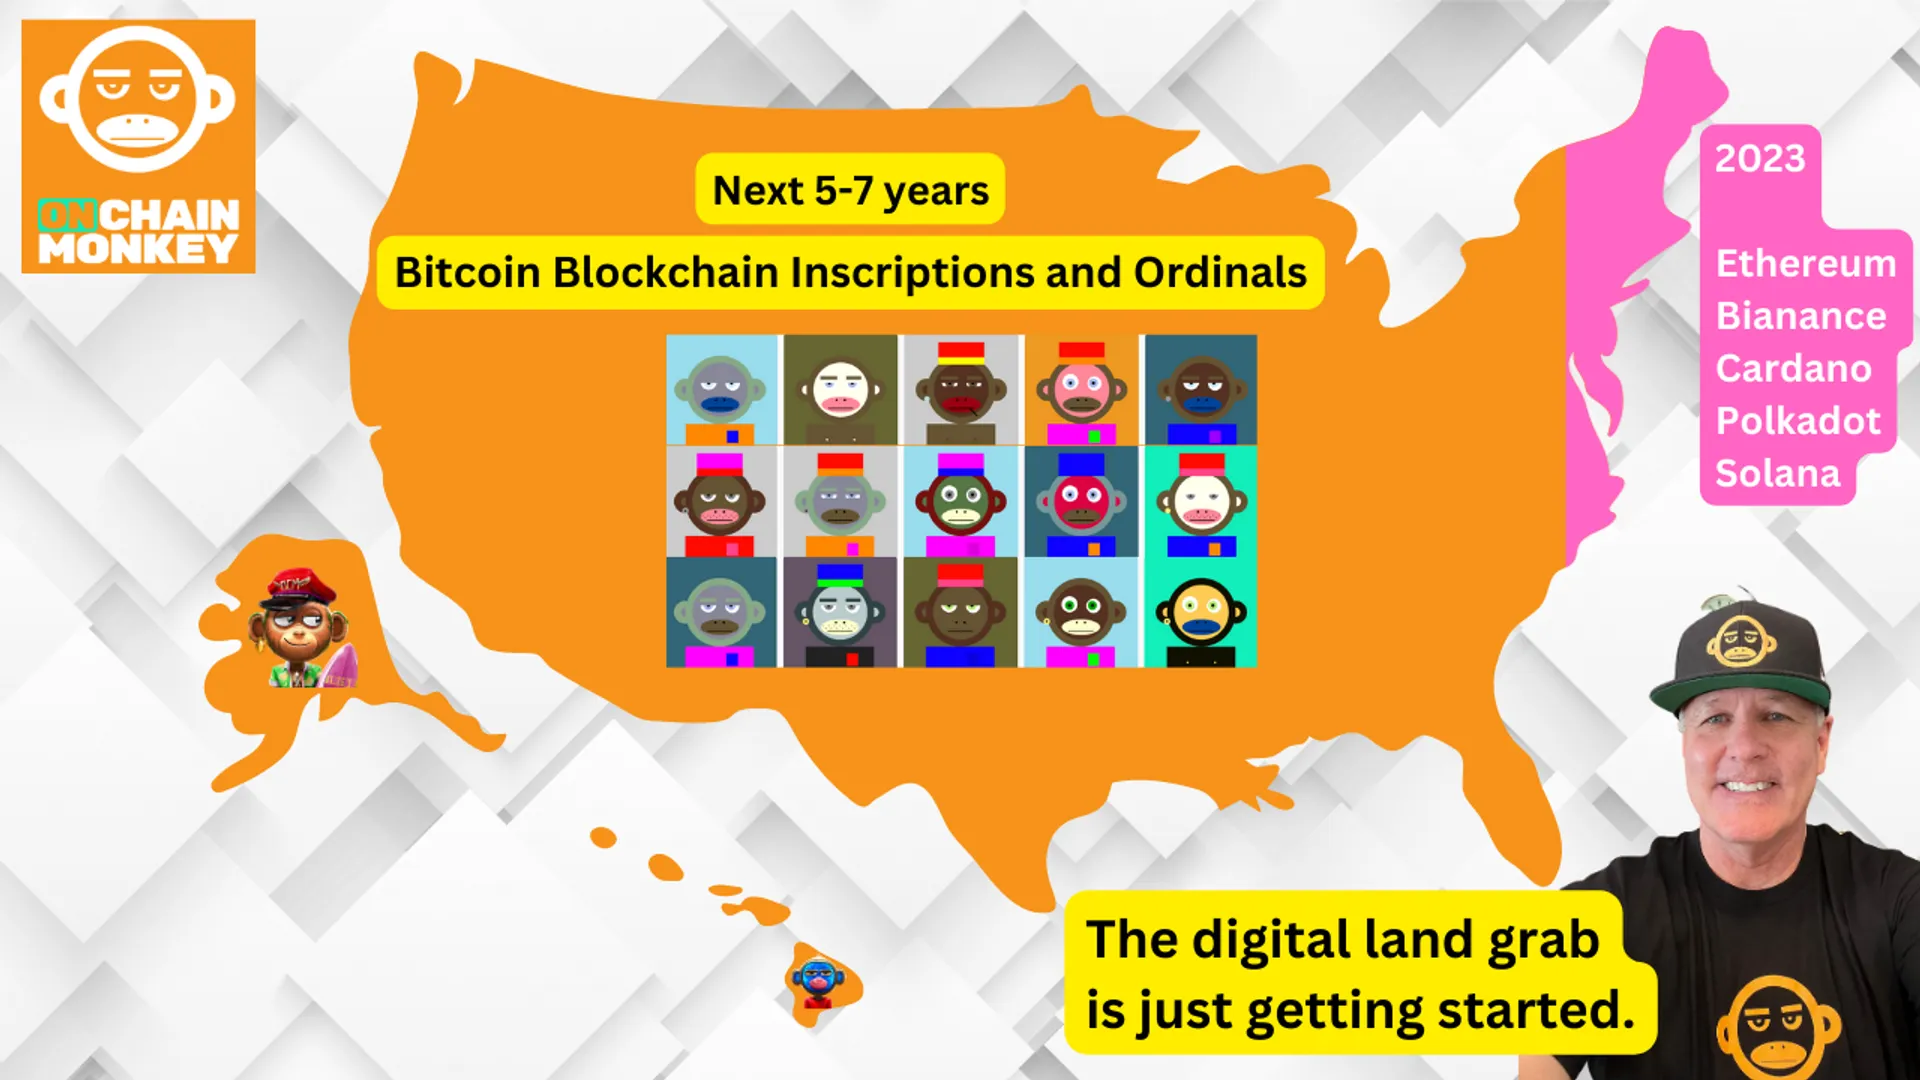 The digital land grab has started. Early settlers like OnChainMonkey are using the latest 2023 Bitcoin protocols like inscriptions, ordinals, recursion, composability, immutability, provenance and an active DAO, to explore, expand, and lead the way.  !RISE